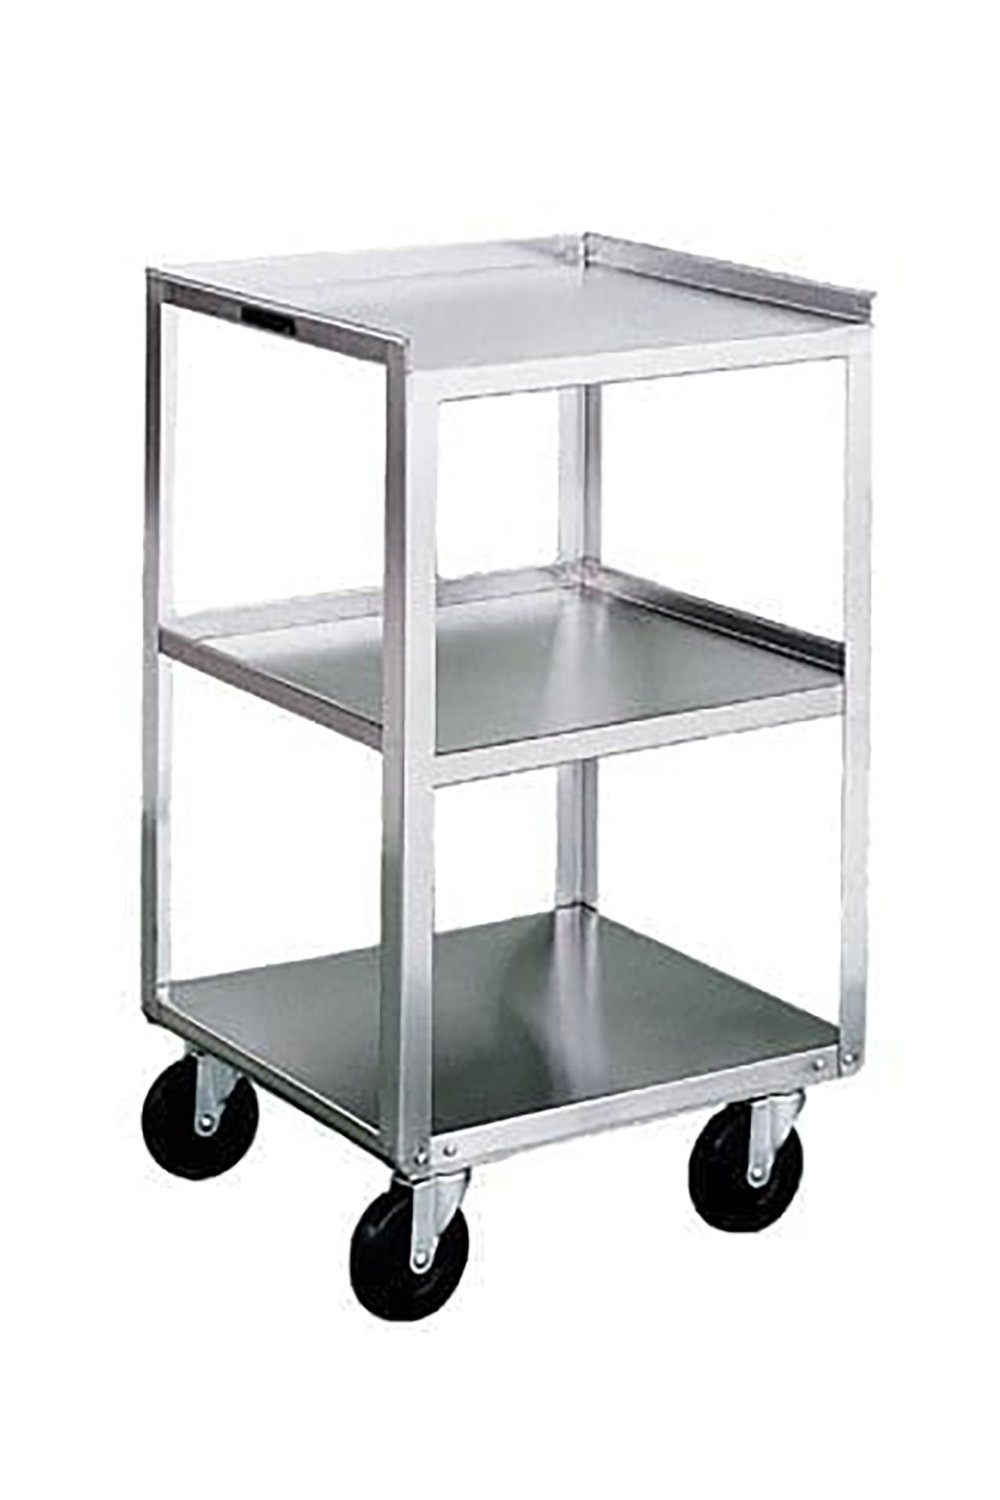 Stainless Steel Equipment/Utility Stand Stainless Solutions Lakeside 18-3/4"D x 16-3/4"W x 31"h No drawers, three shelves 500.0